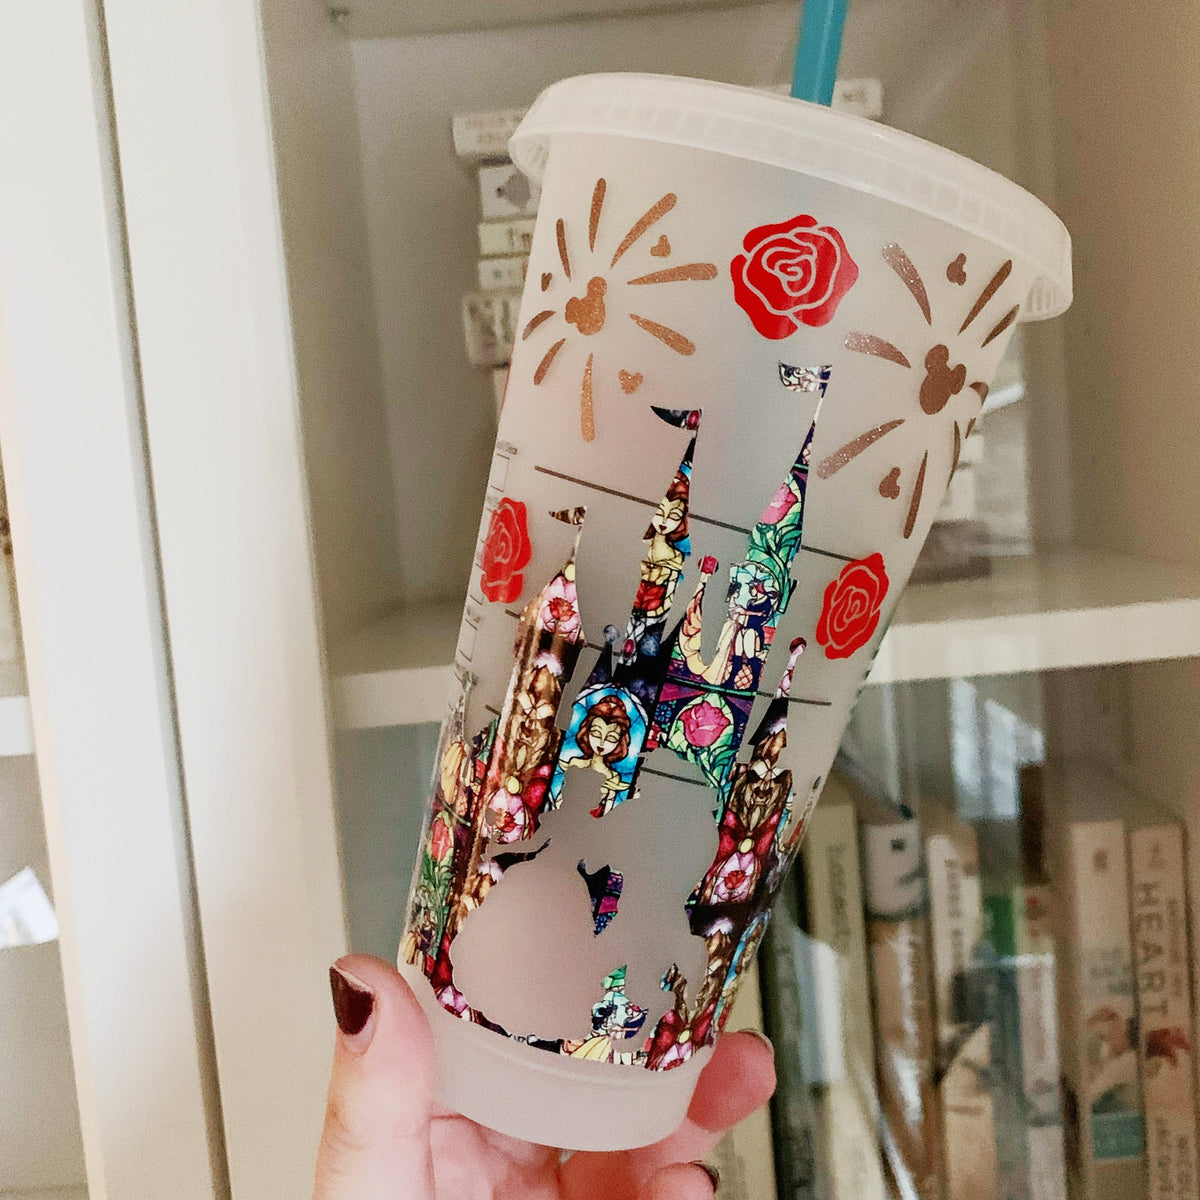 Sparkle With a Disney Castle Personalized Starbucks Cup - home 